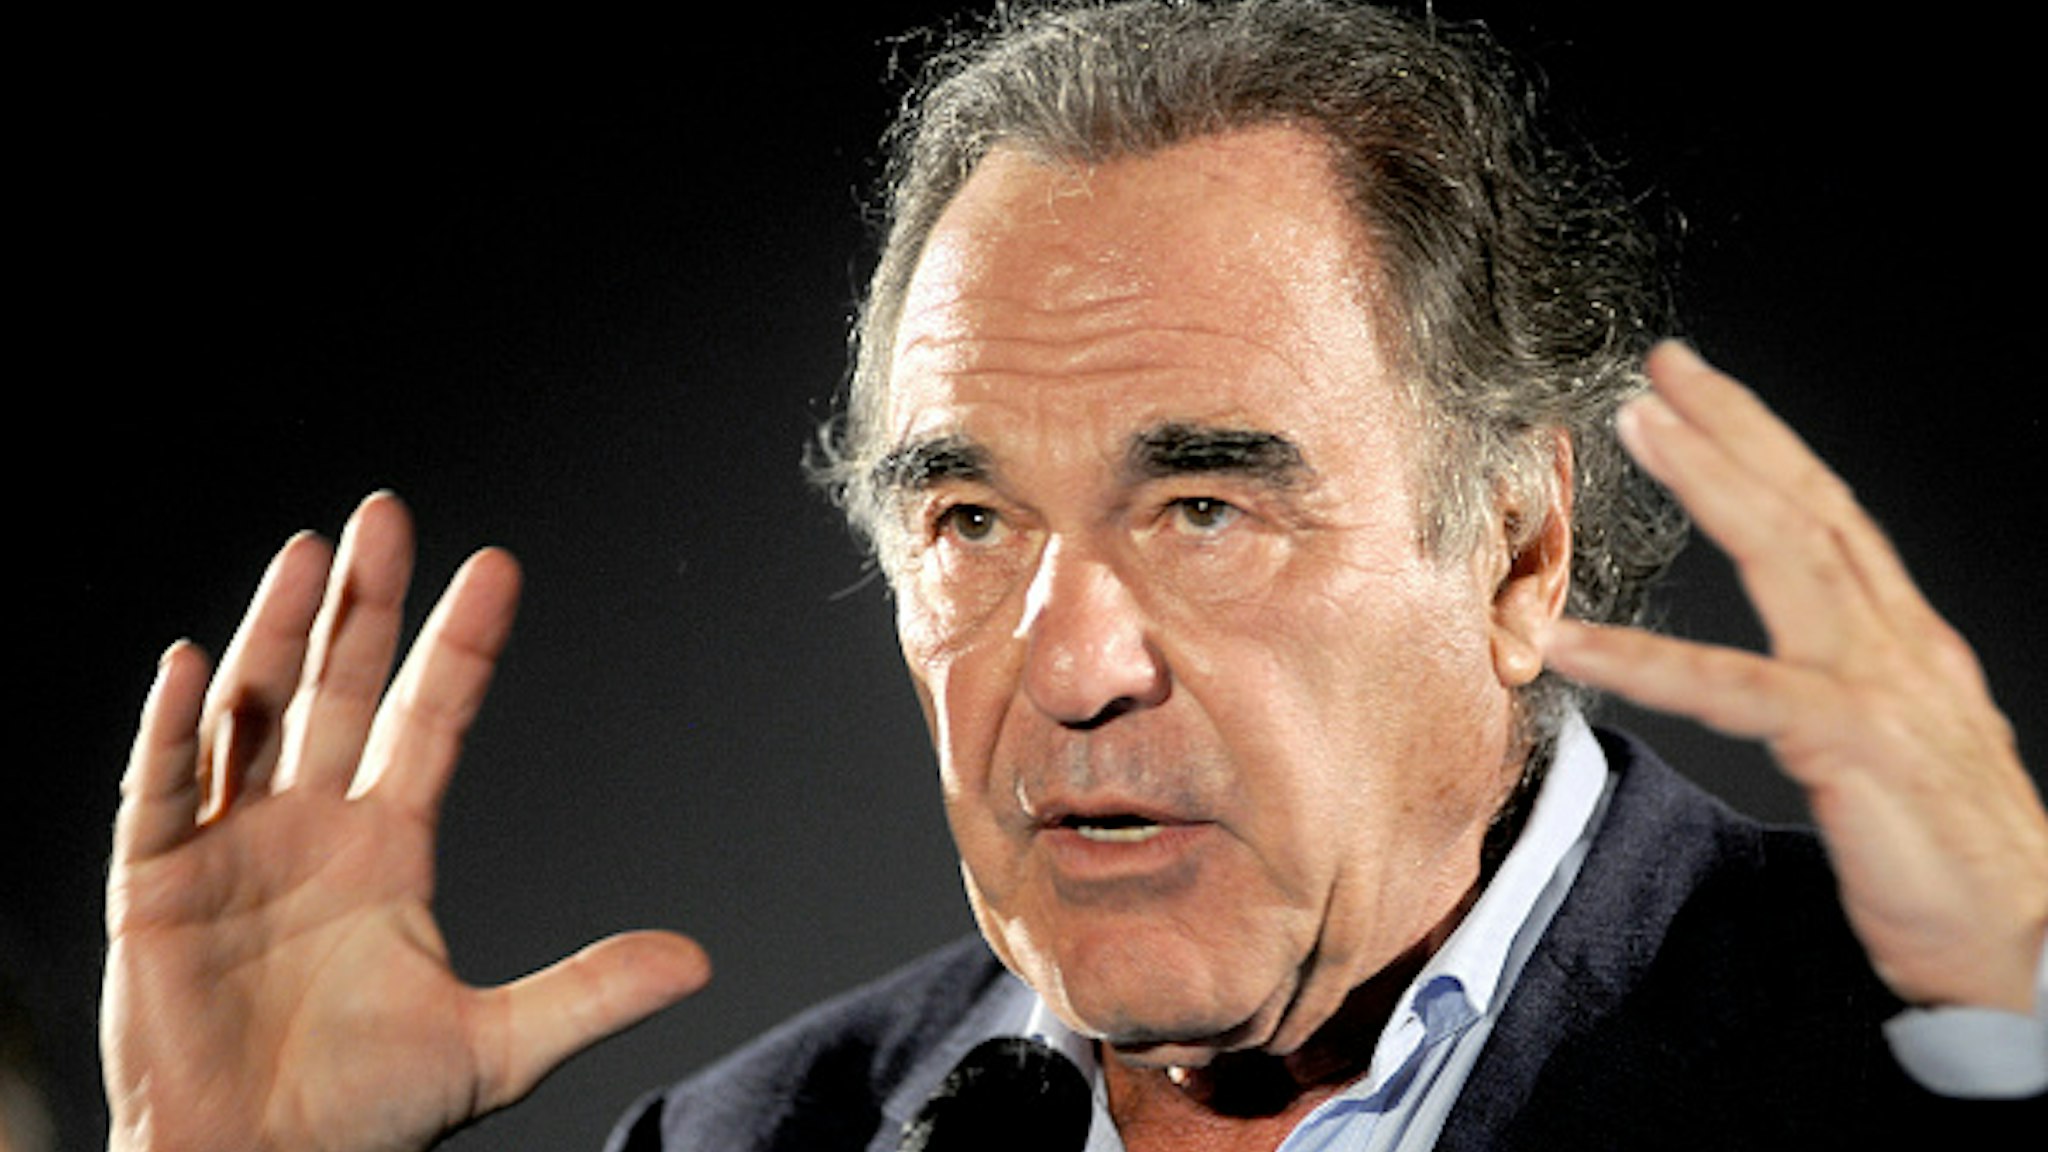 BOLOGNA, ITALY - JULY 07: Director Oliver Stone introduces "The Doors" during the Cinema Ritrovato Festival at Piazza Maggiore on July 07, 2019 in Bologna, Italy.